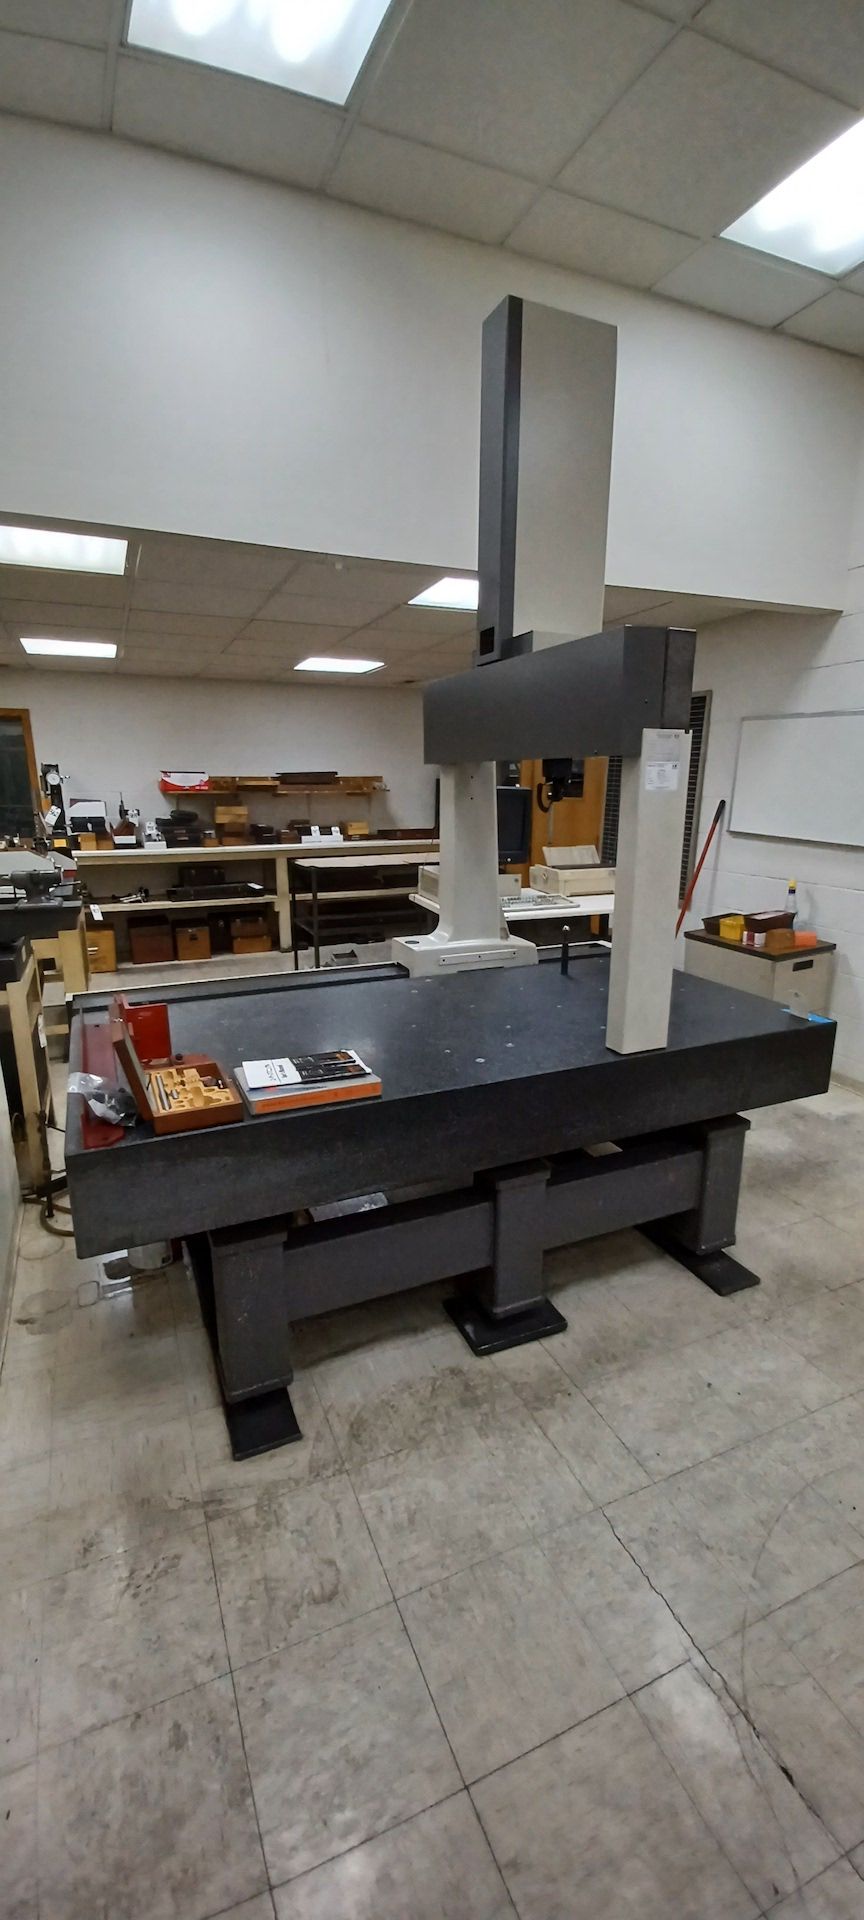 LOT: Mitutoyo Microcord Model BH715 Coordinate Measuring Machine, S/N 0314508002111112, 83 in. x - Image 2 of 8